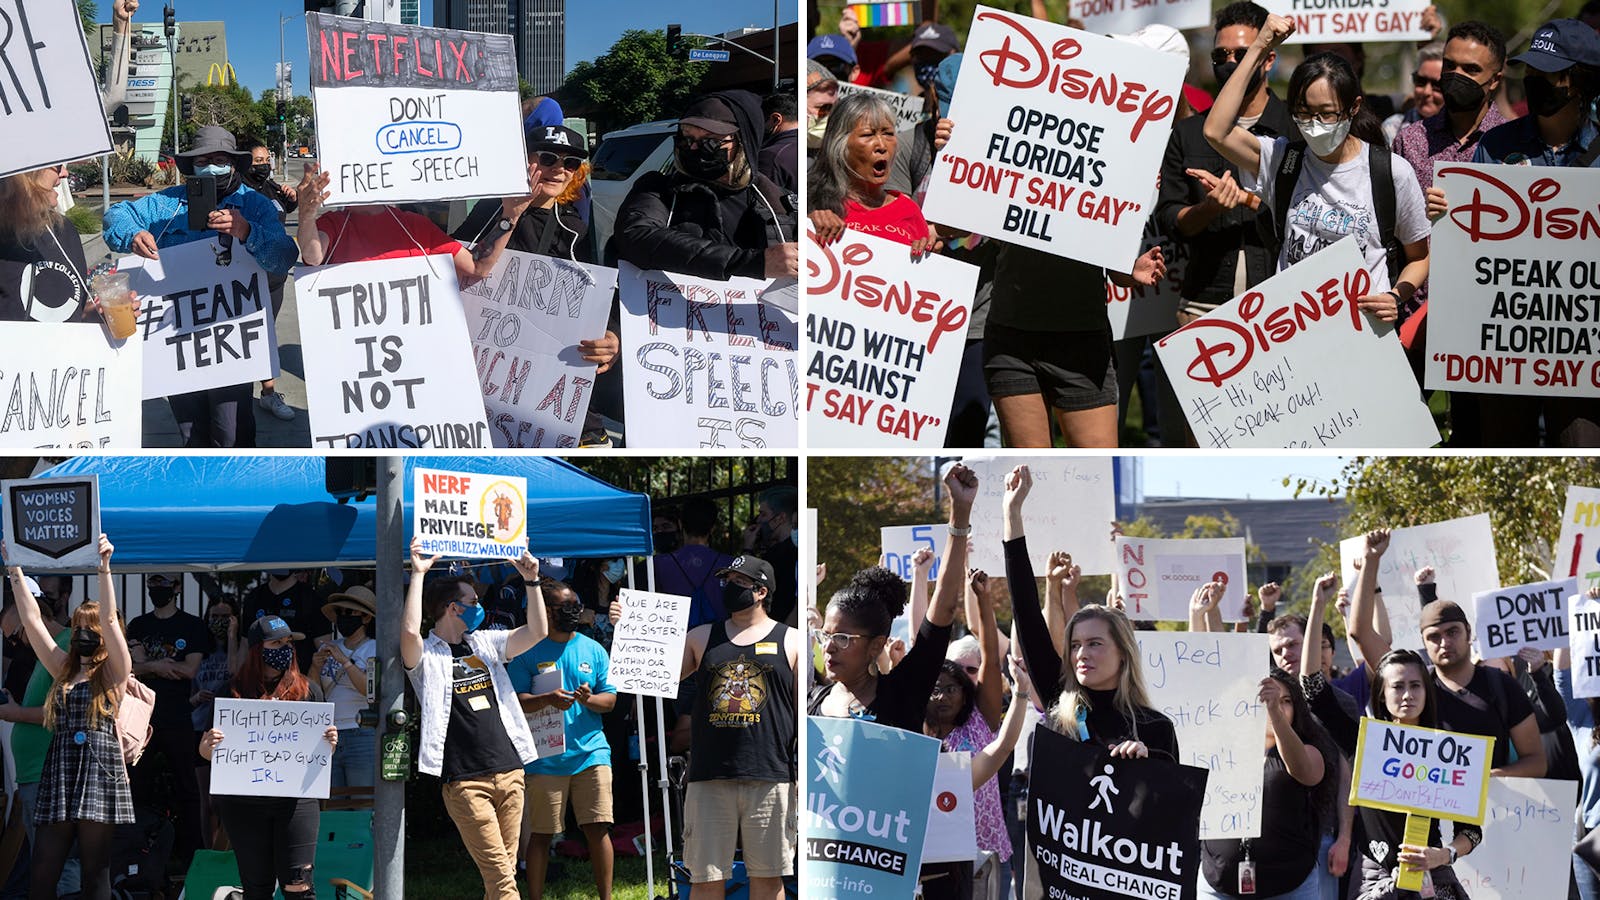 Clockwise from top left: Netflix employees walk out in support of transgender employees; Disney employees and demonstrators rally against Florida's "Don't Say Gay" bill; Google employees protest the company's handling of sexual misconduct allegations; Activision Blizzard employees protest the company's response to a sexual discrimination lawsuit. Photos by Bloomberg; AP